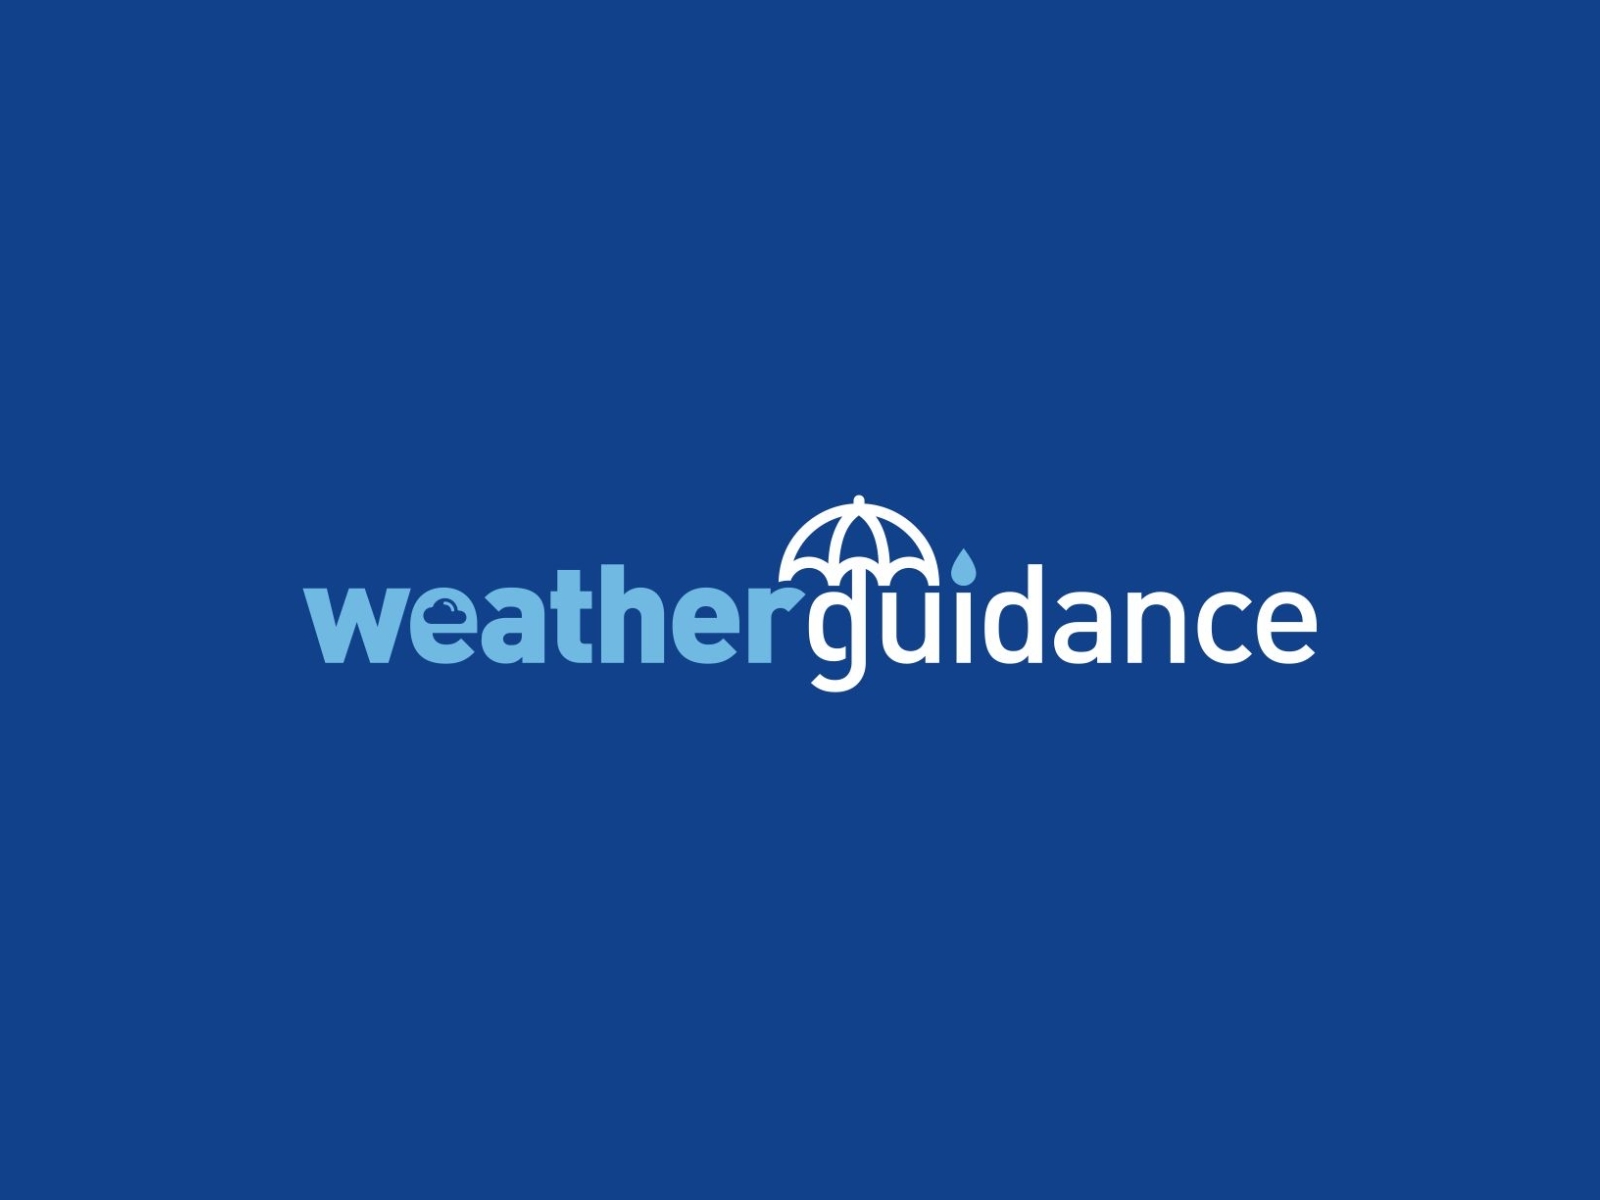 Logo design for weather guidance by Toni Zufic on Dribbble